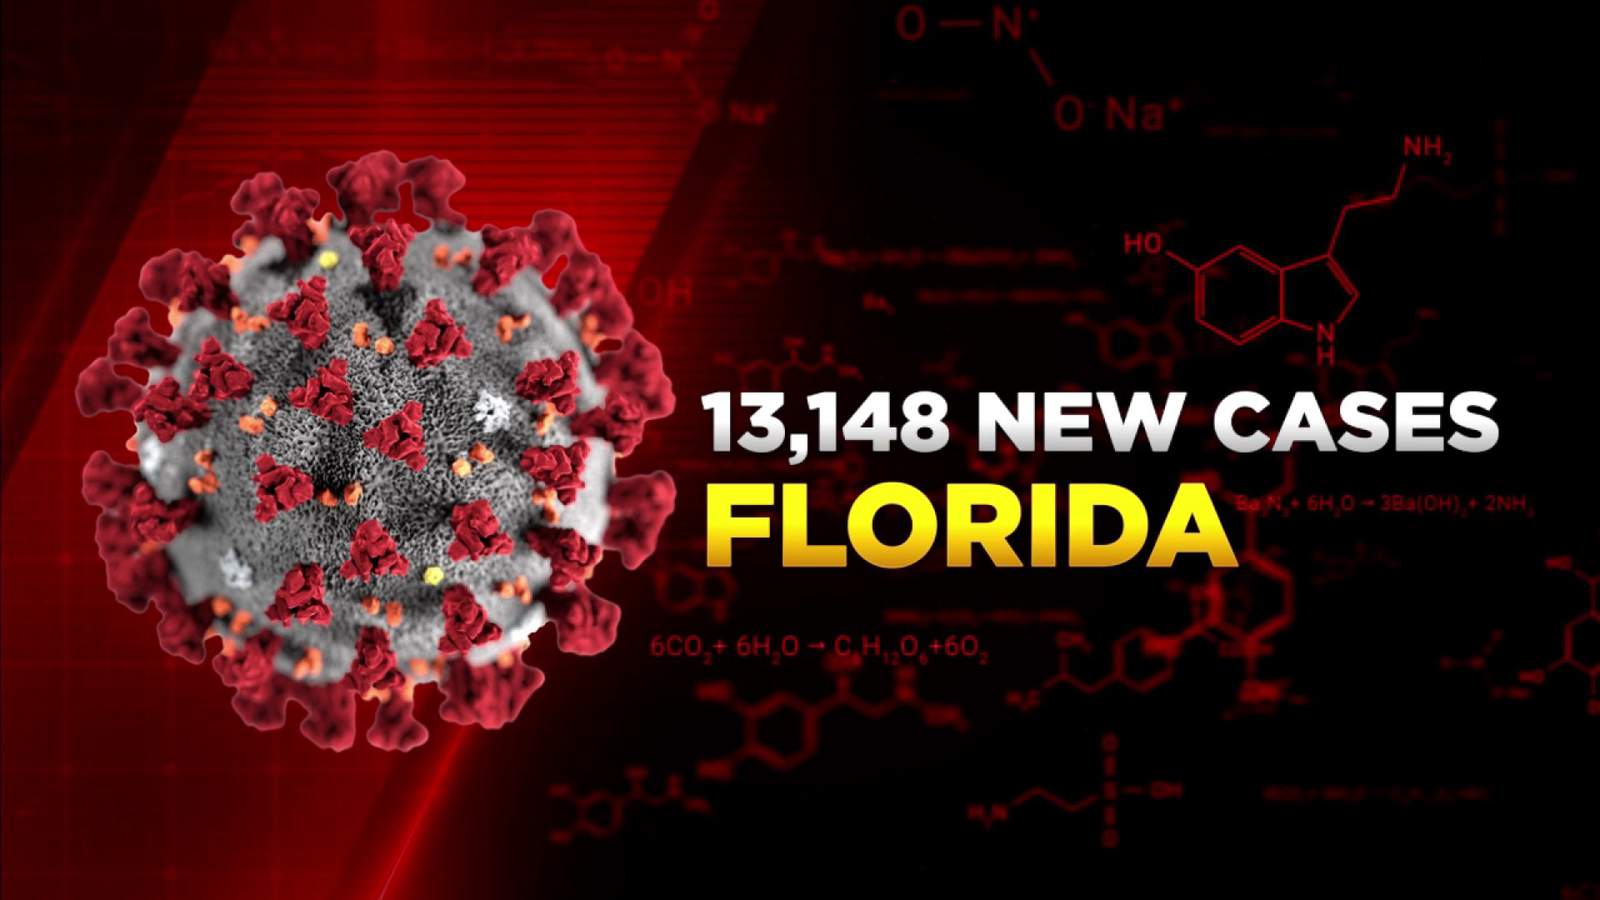 Florida reports 13,148 new coronavirus cases Thursday, most since mid-July